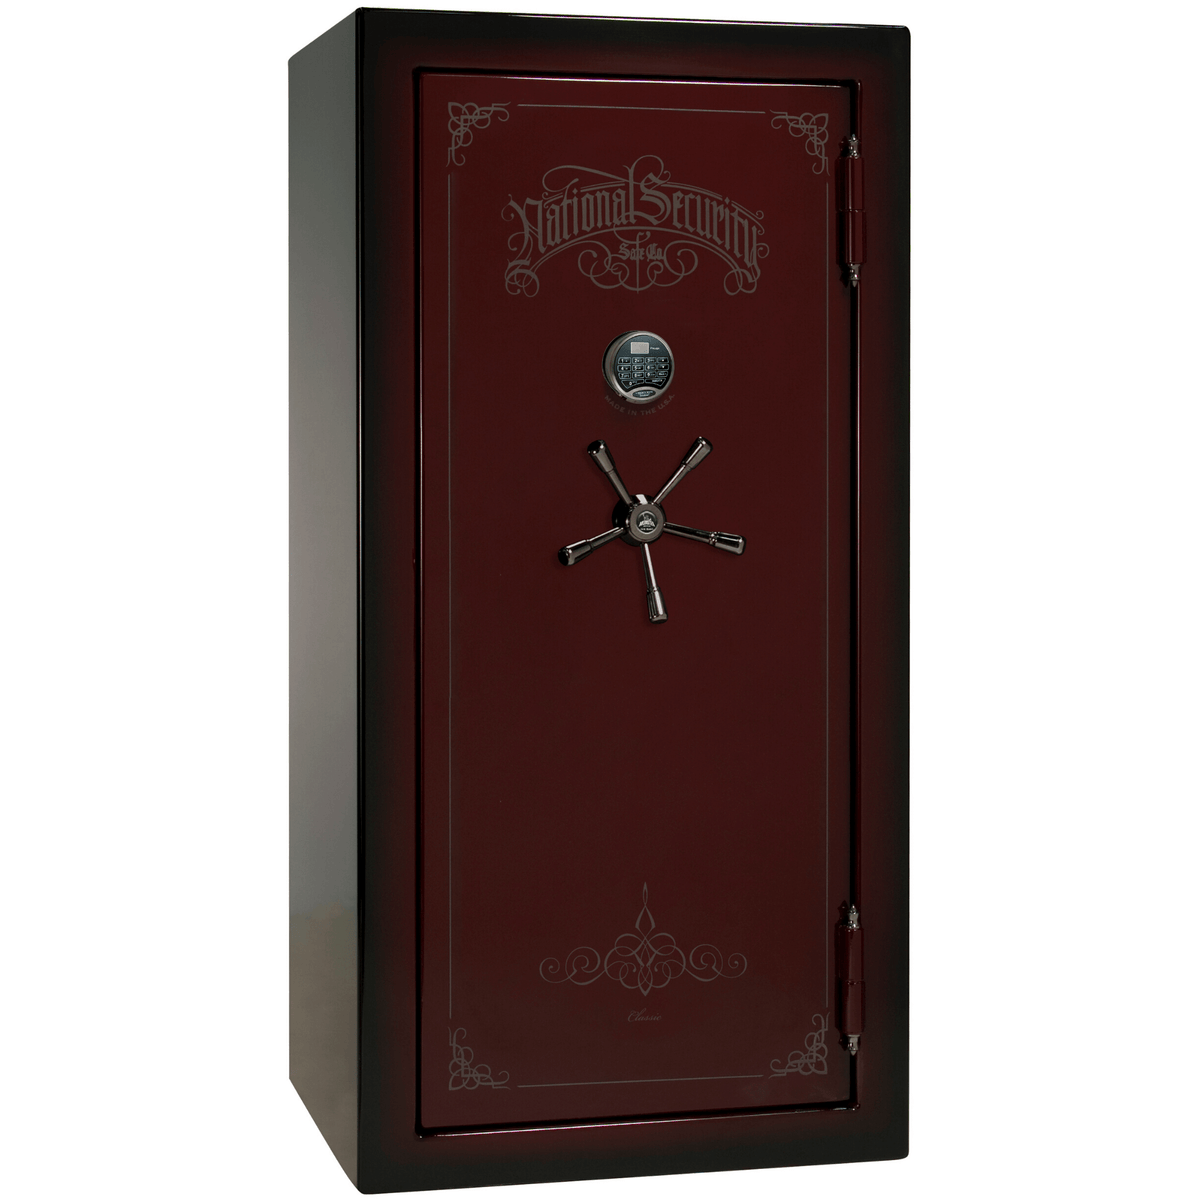 Liberty Safe Classic Plus 25 in Feathered Burgundy Gloss with Black Chrome Electronic Lock, closed door.